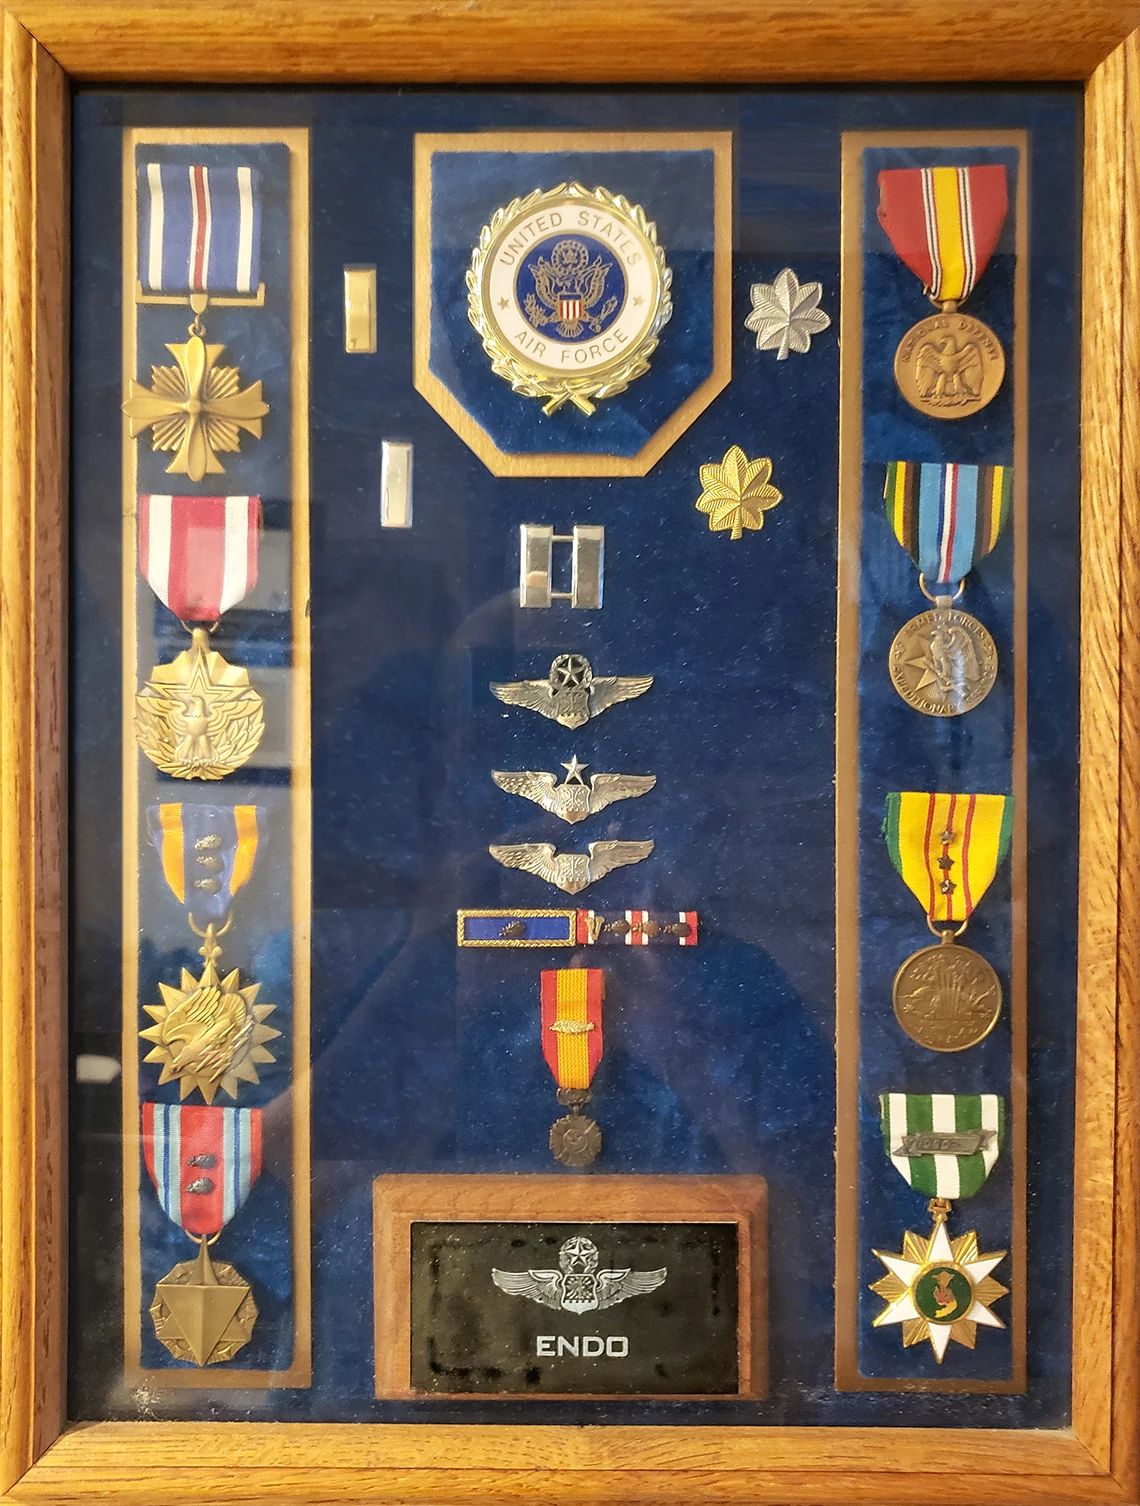 toki endo's military medals sit in a shadowbox.